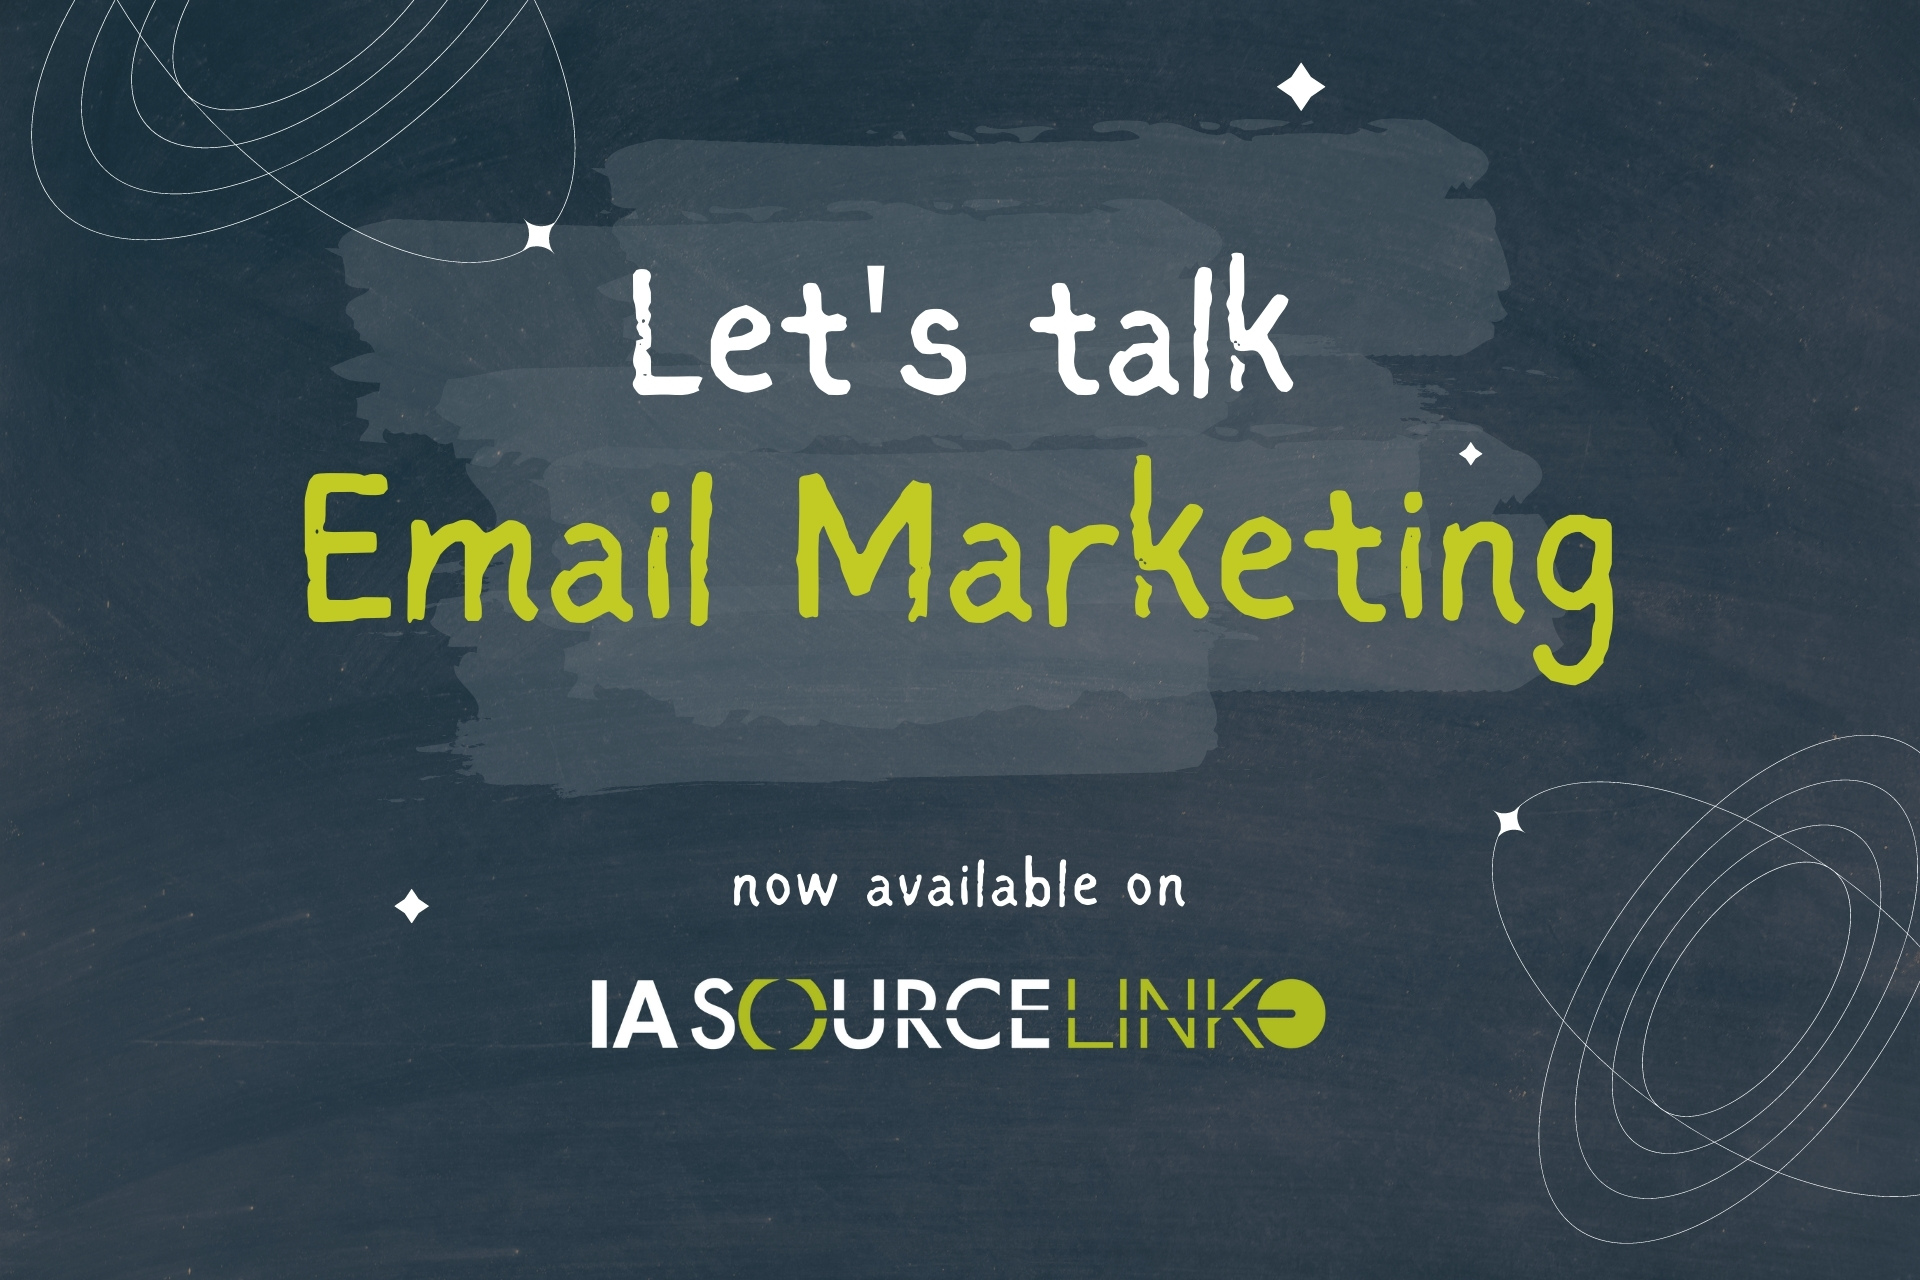 let's talk email marketing written against grey background